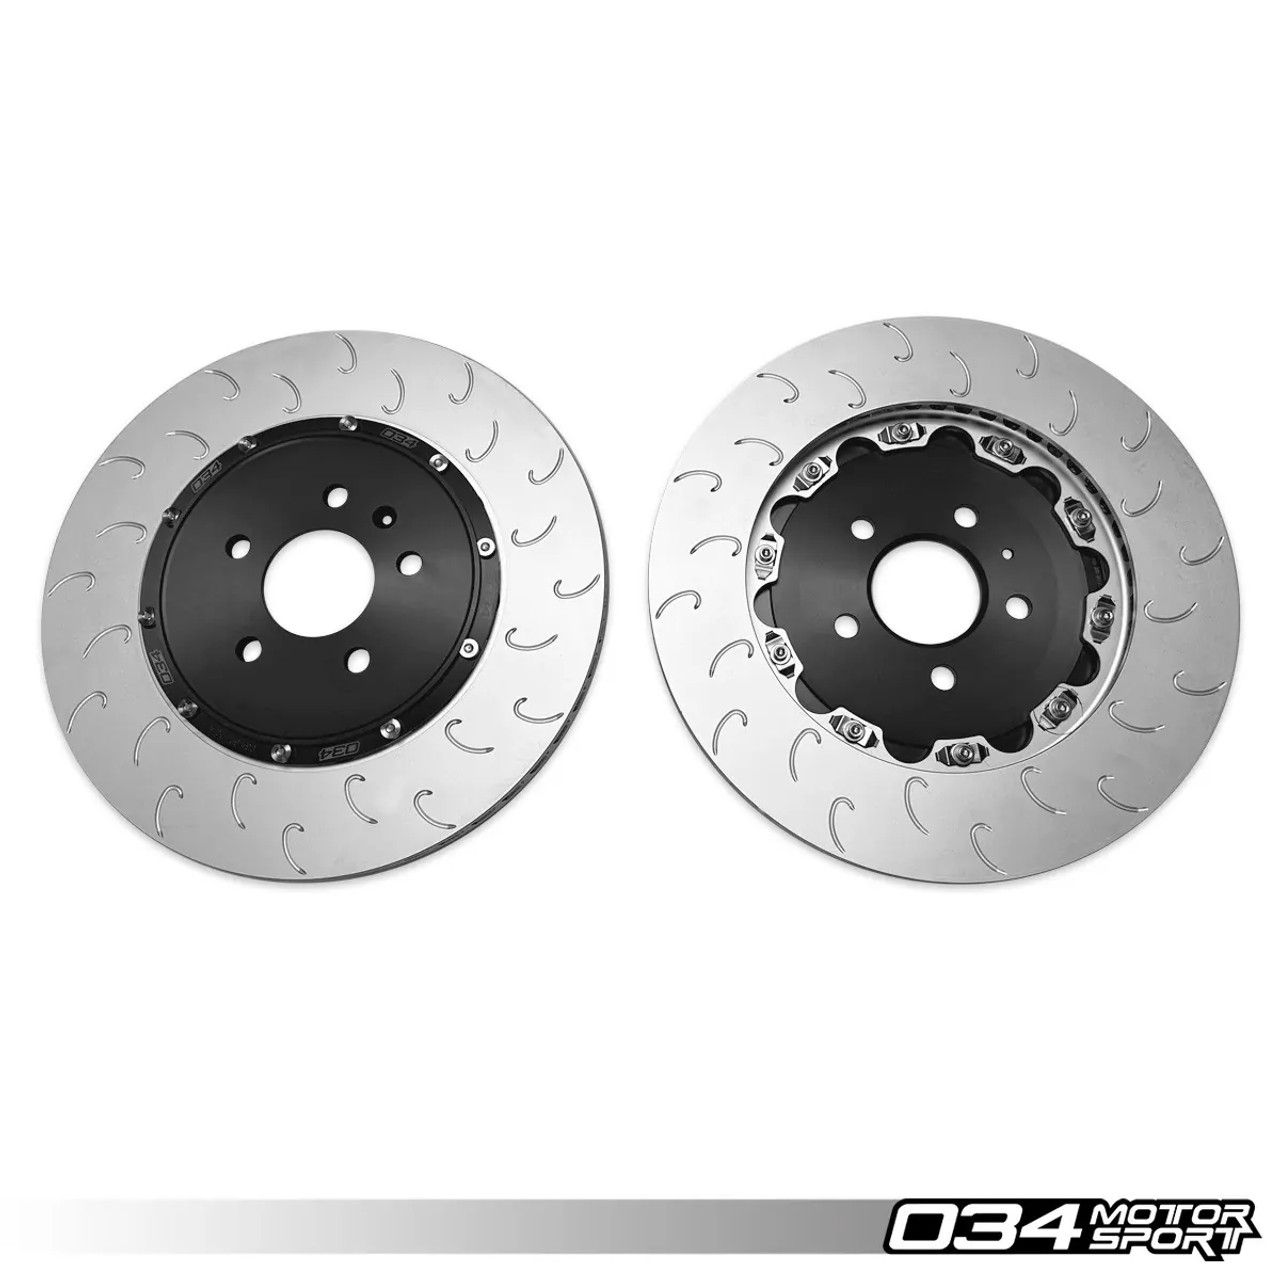 034Motorsport 2-Piece Floating Rear Brake Rotor Upgrade for C8 S6 & S7, D5 A8 & S8 & 4M/4M.5 Q7, SQ7, Q8 & SQ8